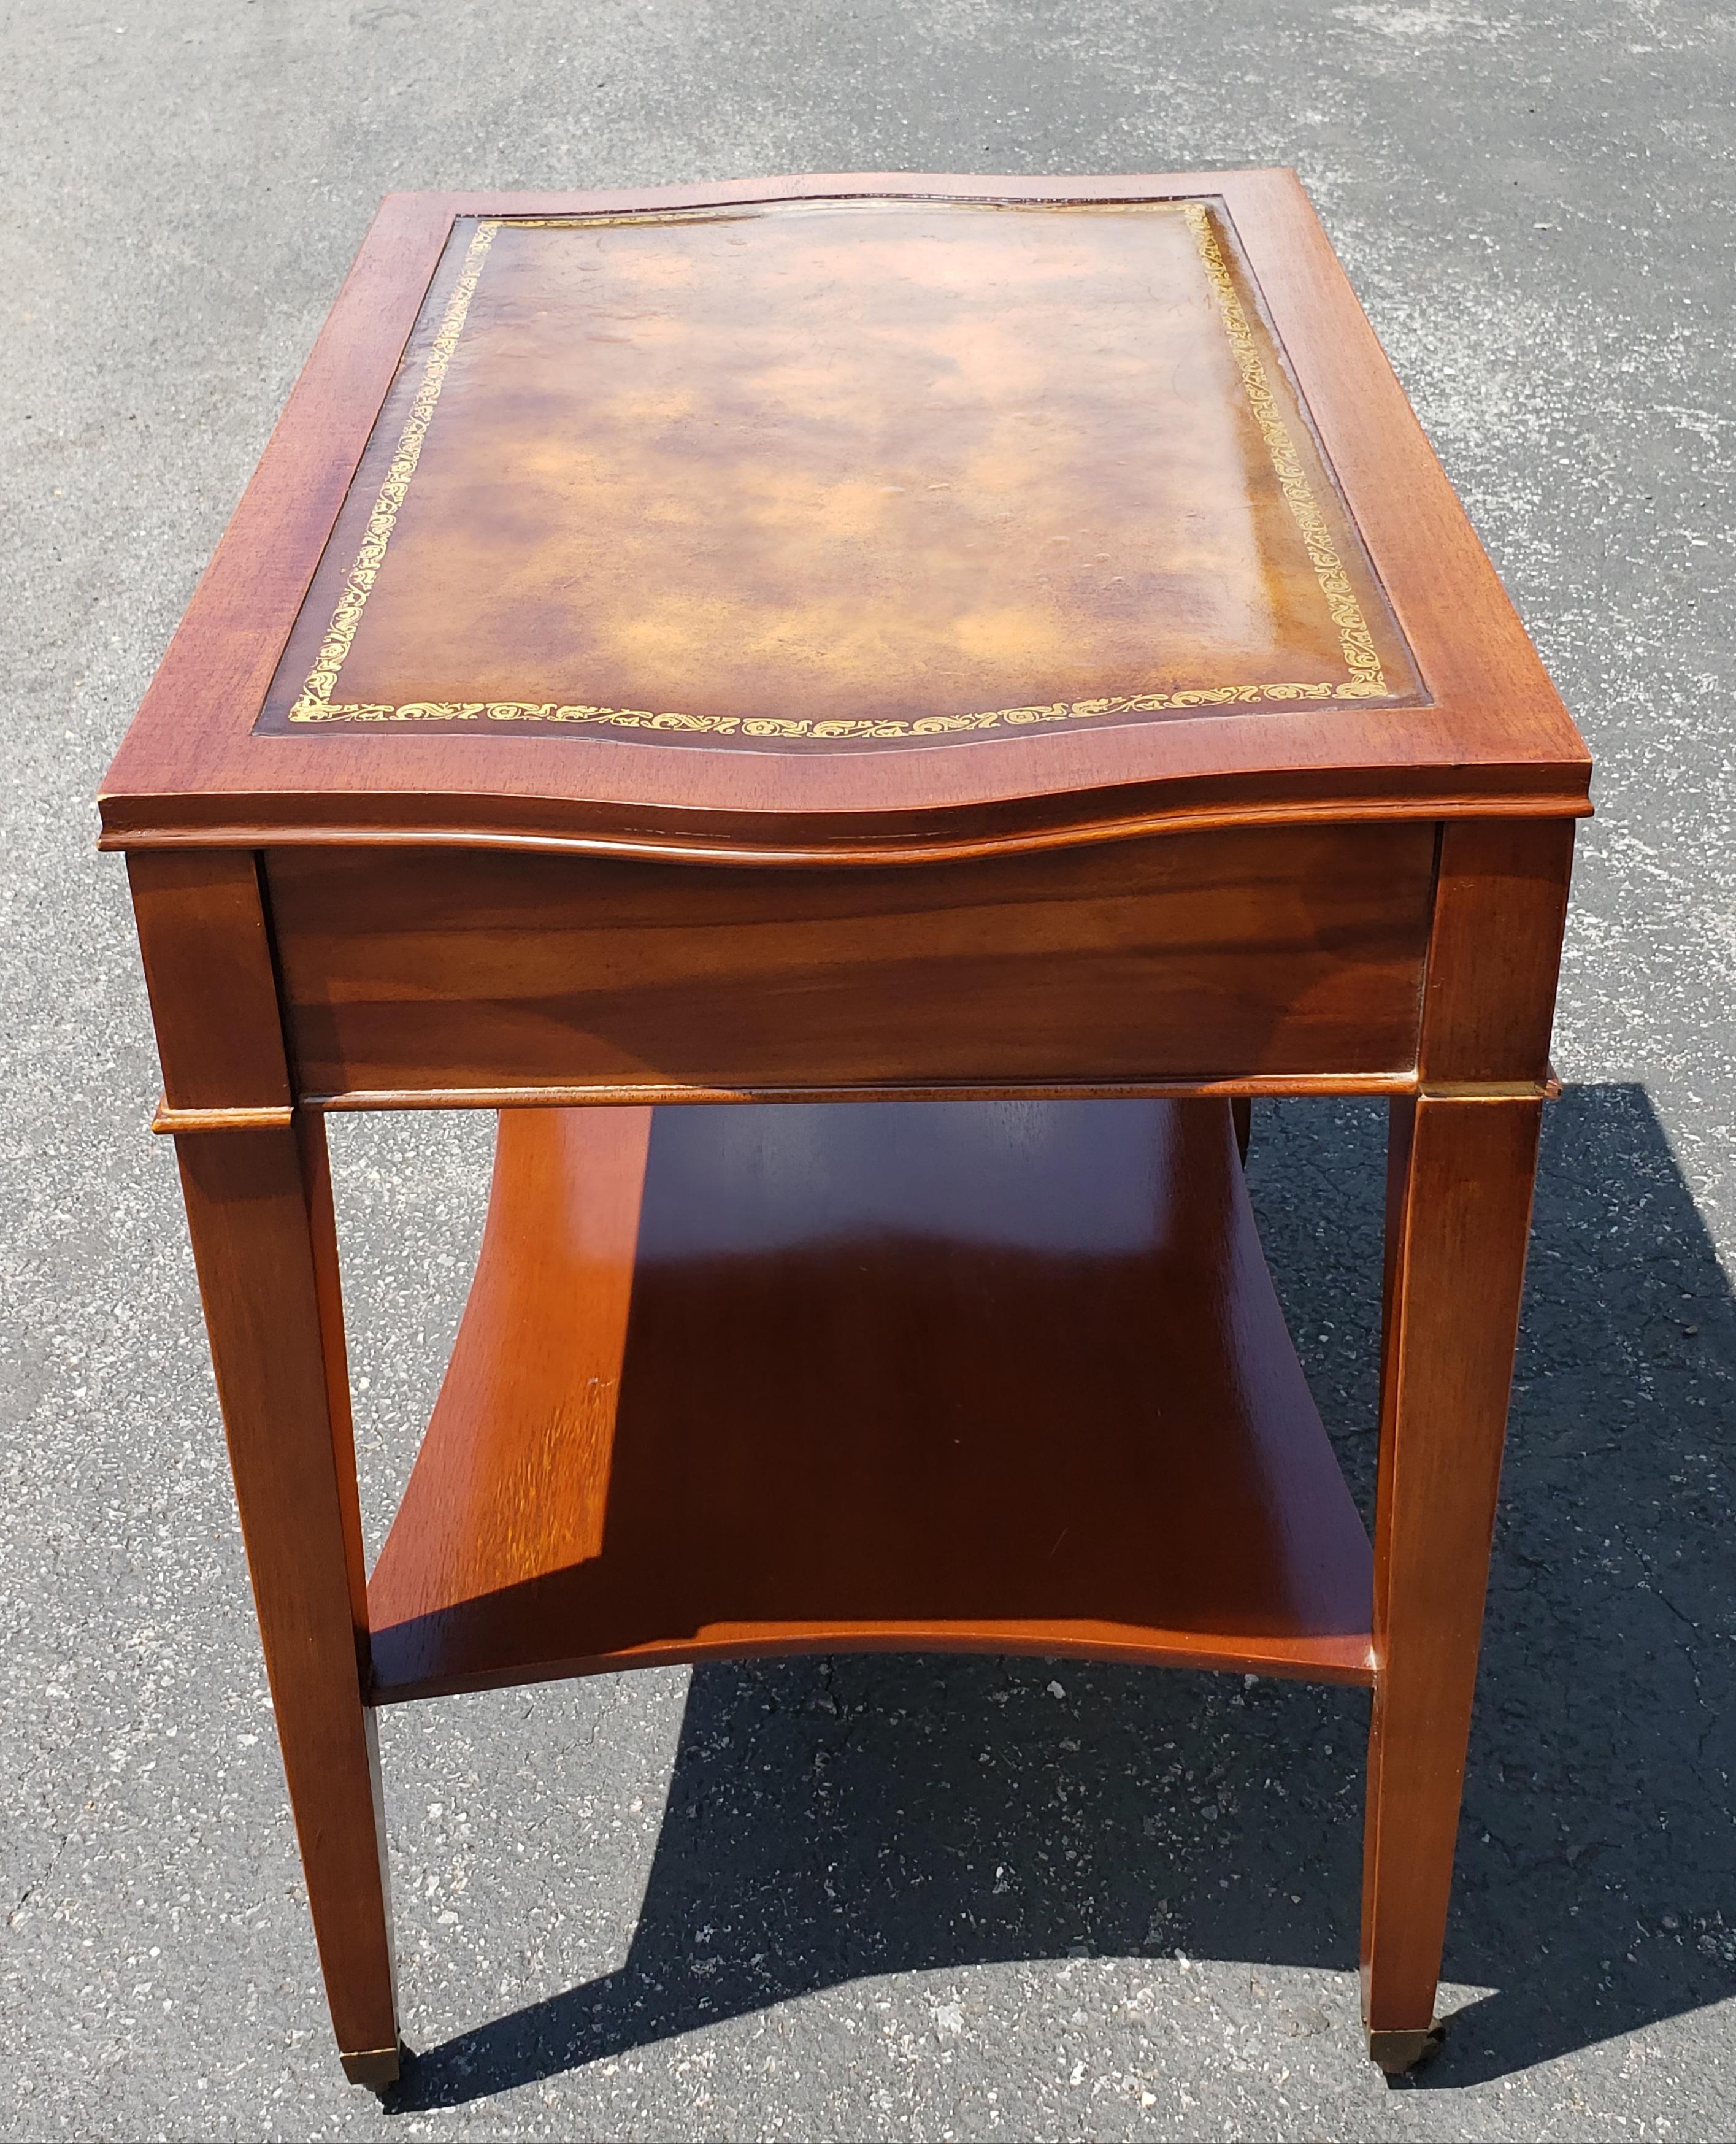 1958 Hollywood Regency Mahogany Inlay Tooled Leather Top and Gilt Stencil Tables In Good Condition For Sale In Germantown, MD